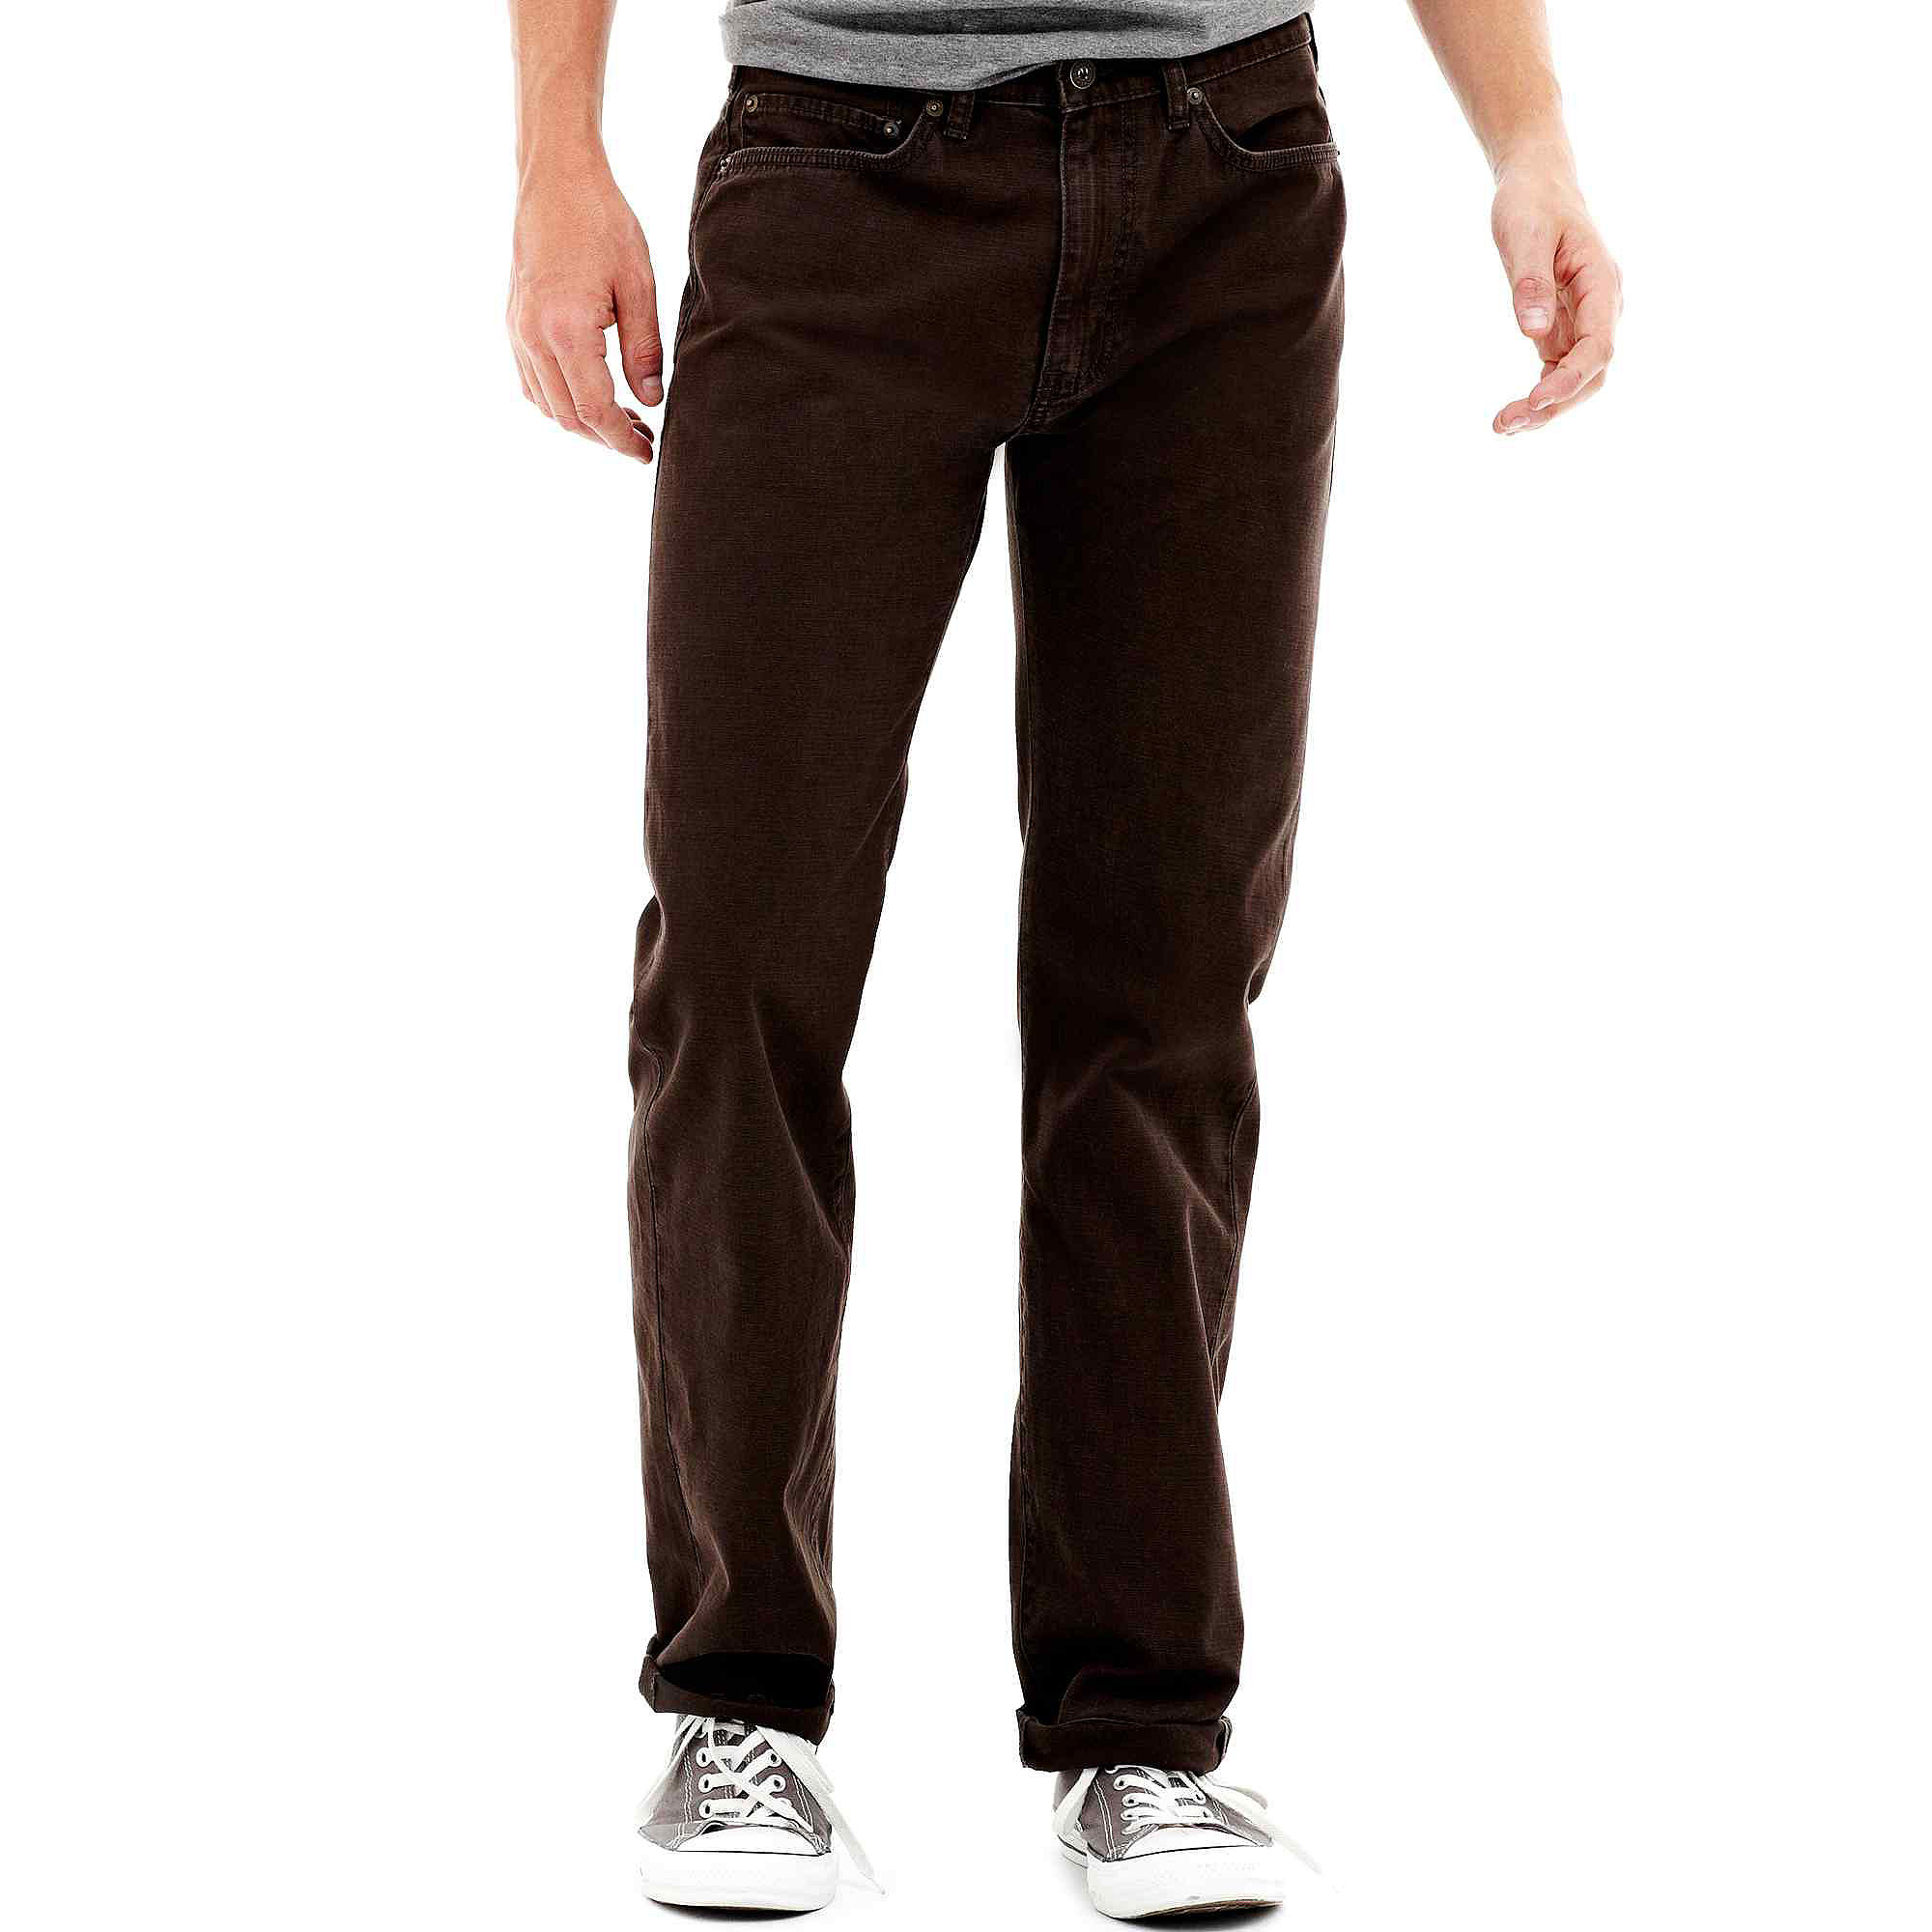 UPC 039307589475 product image for Dockers 5 Pocket Straight-Fit Flat-Front Pants | upcitemdb.com